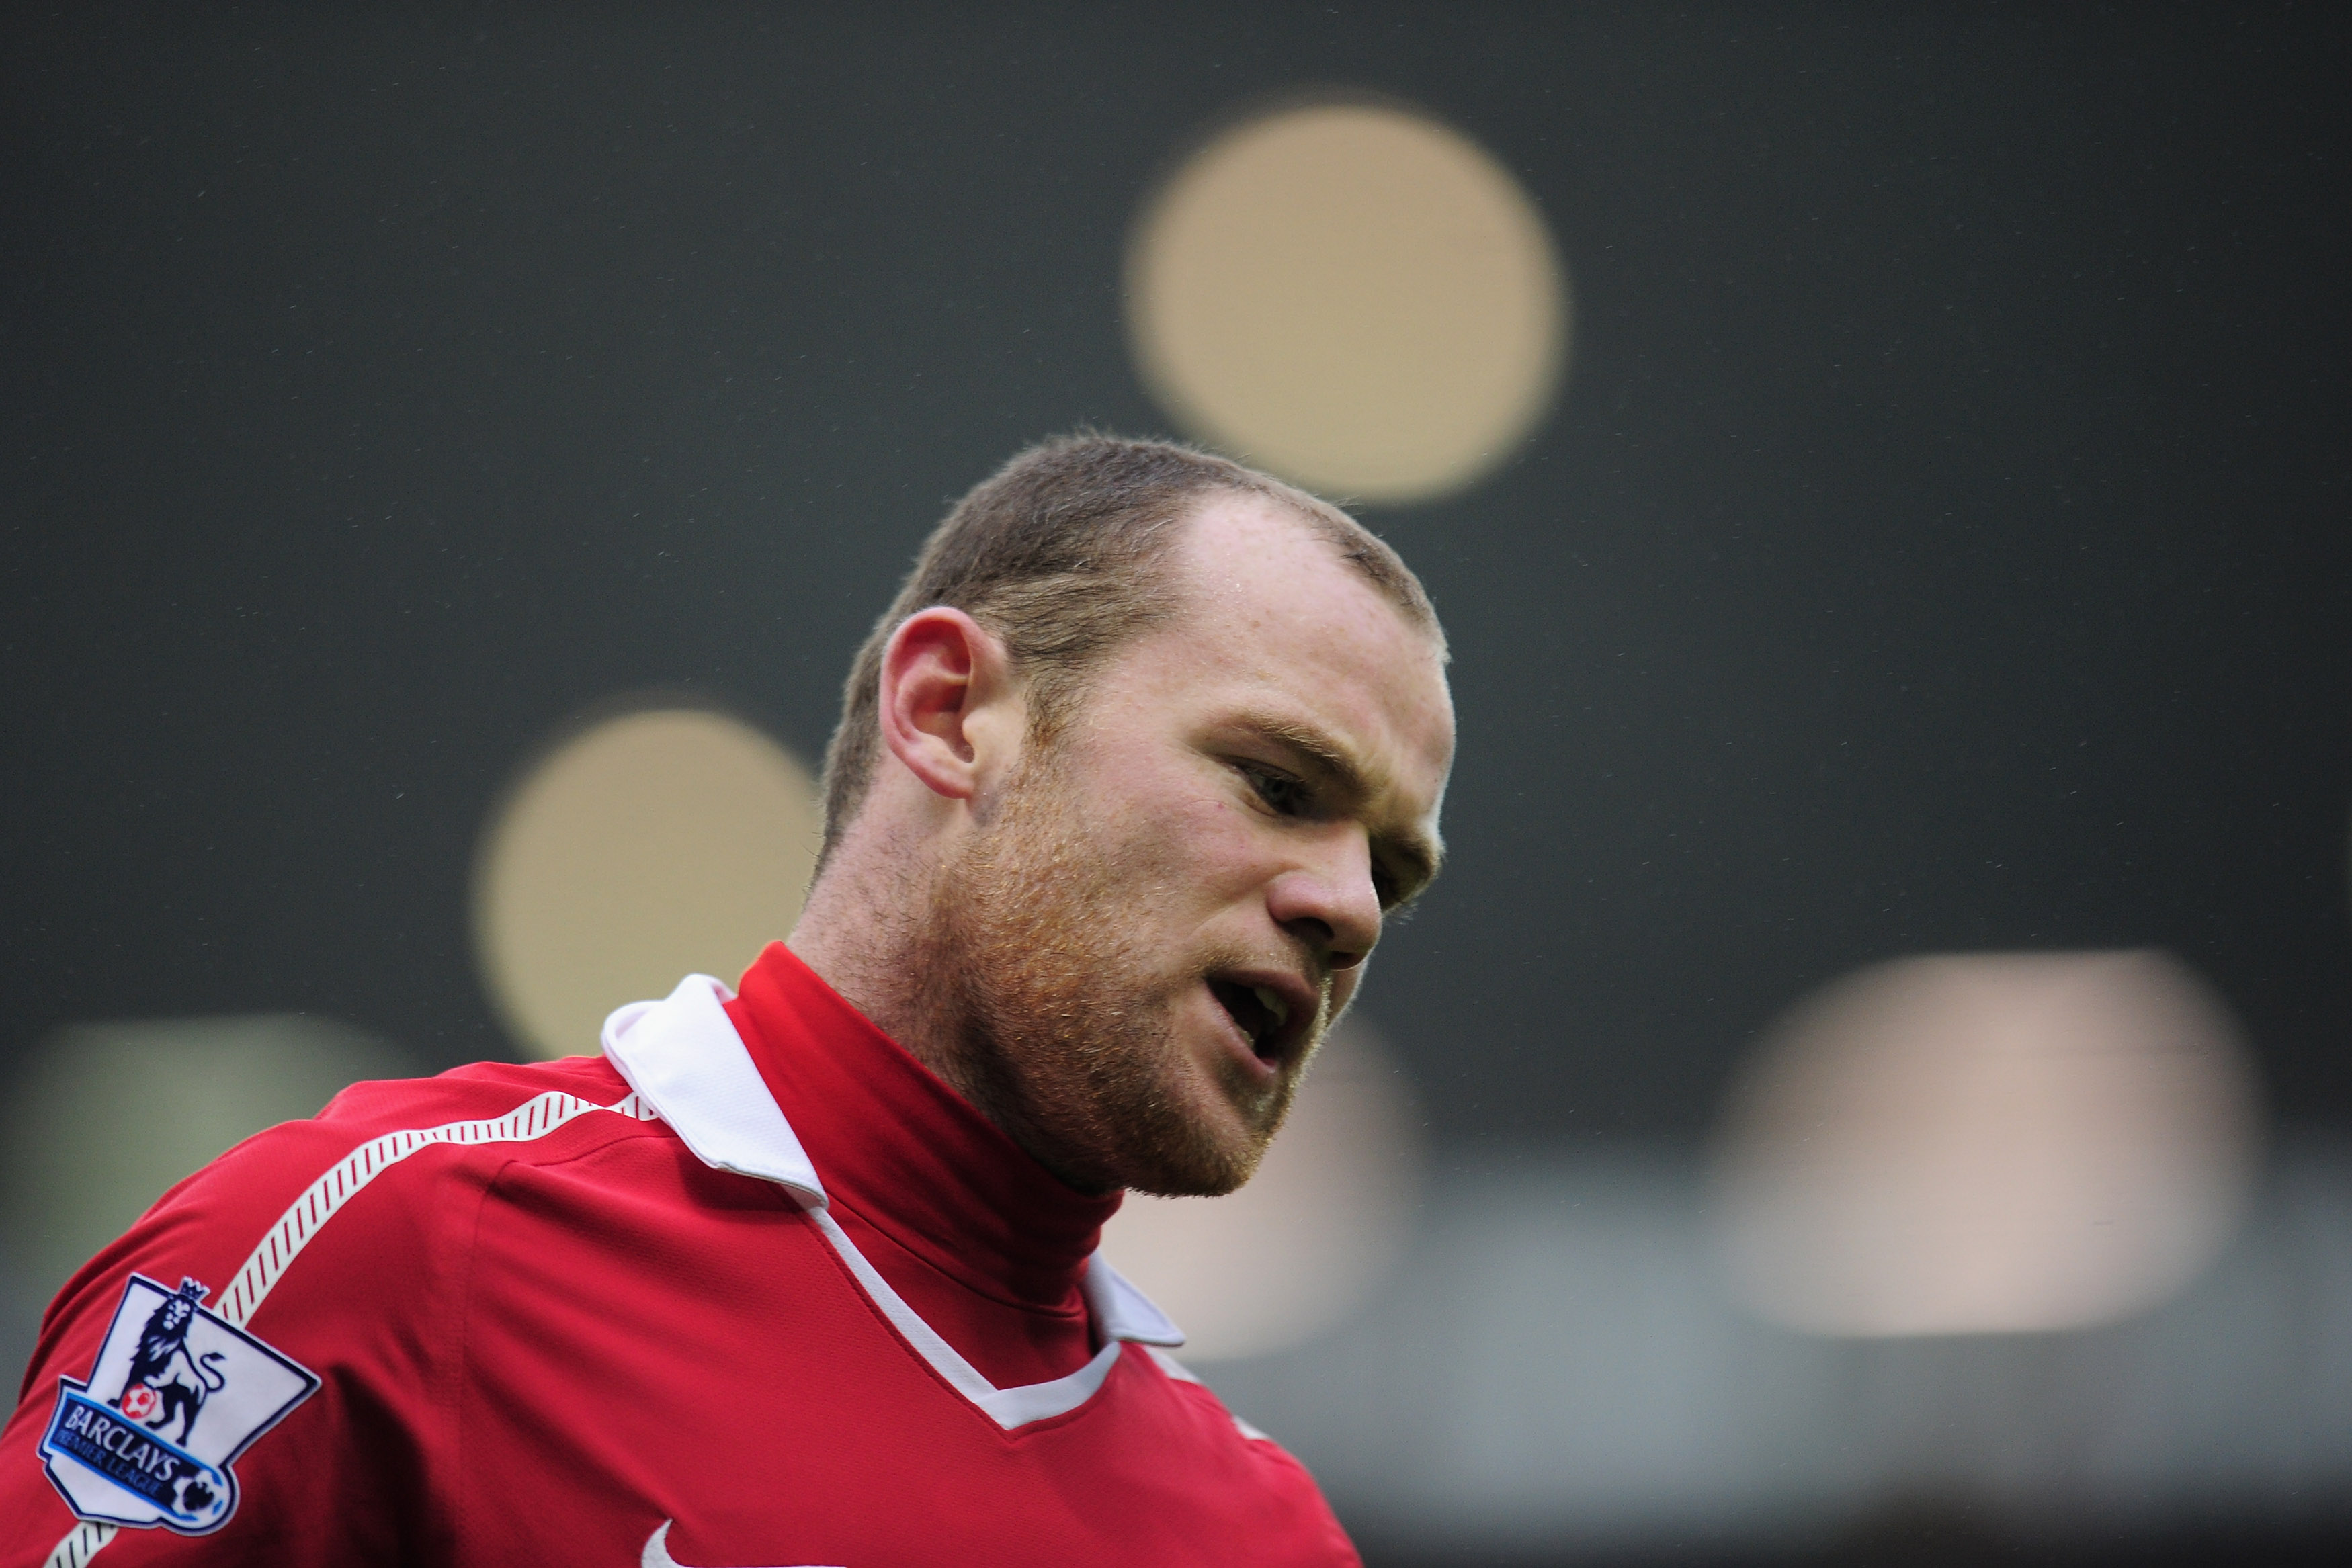 WEST BROMWICH, ENGLAND - JANUARY 01:  Wayne Rooney of Manchester United  during the Barclays Premier League match between West Bromich Albion and Manchester United at The Hawthorns on January 1, 2011 in West Bromwich, England.  (Photo by Shaun Botterill/G